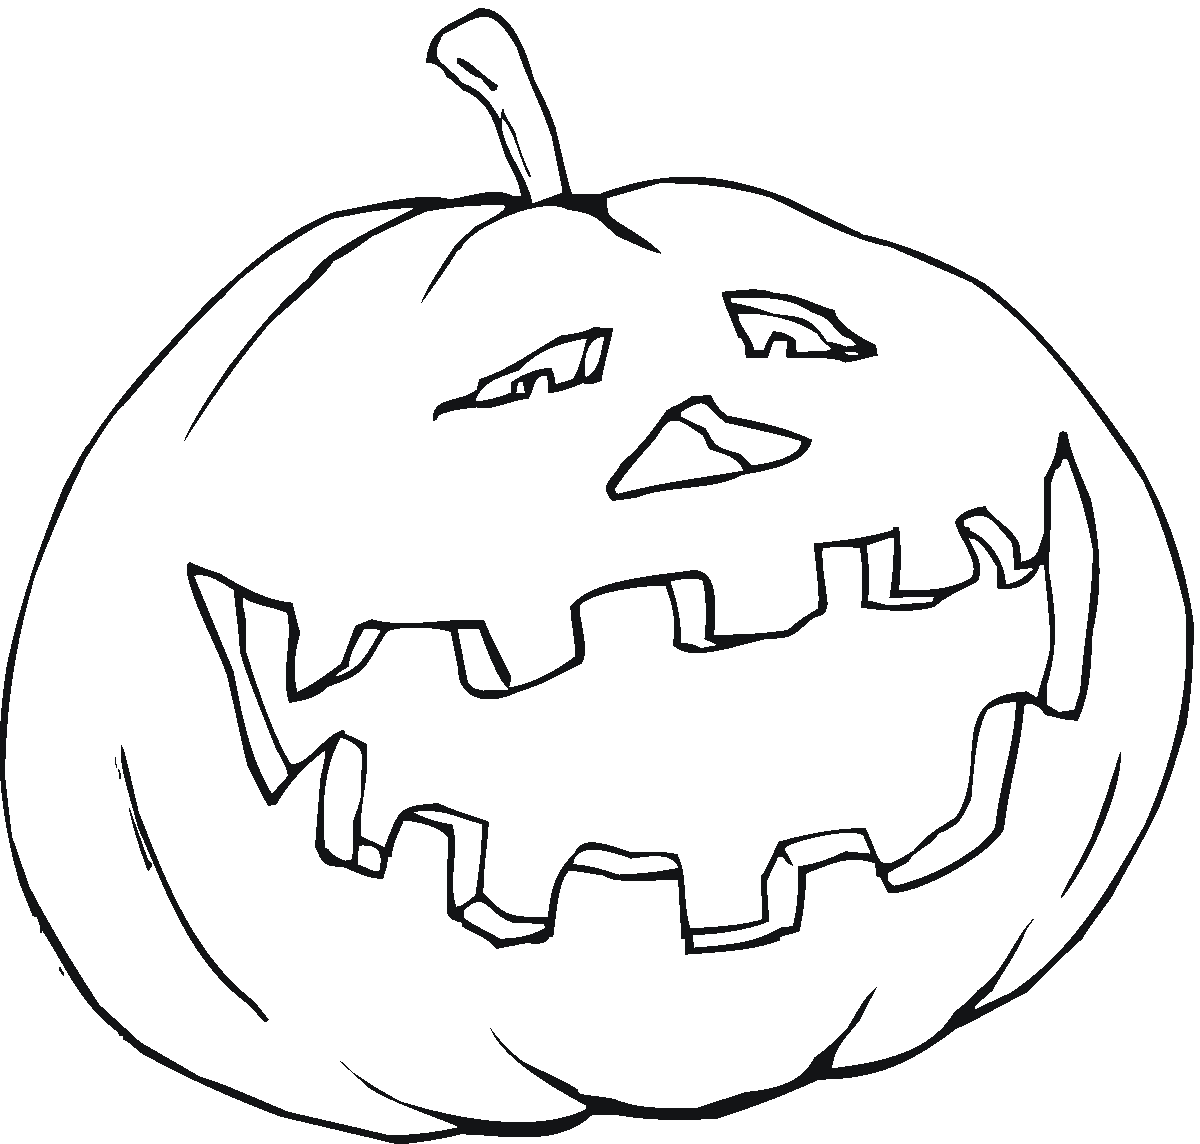 Free Pumpkin Coloring Pages � Halloween Arts